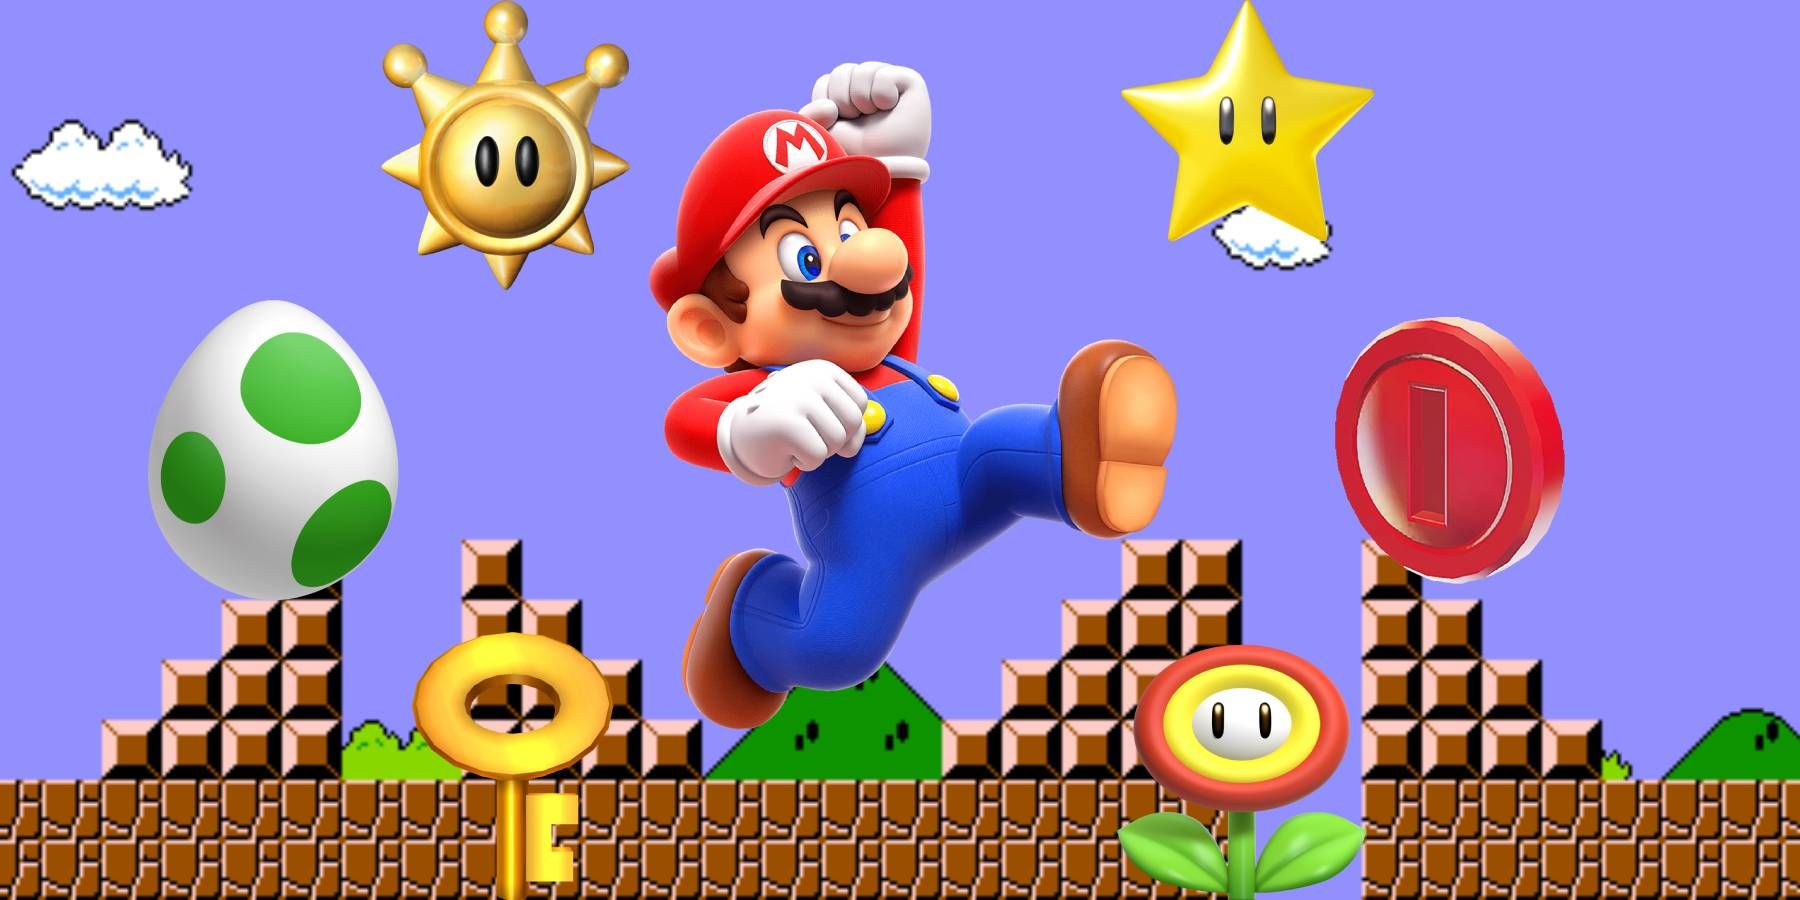 Mario with several items from the Super Mario series